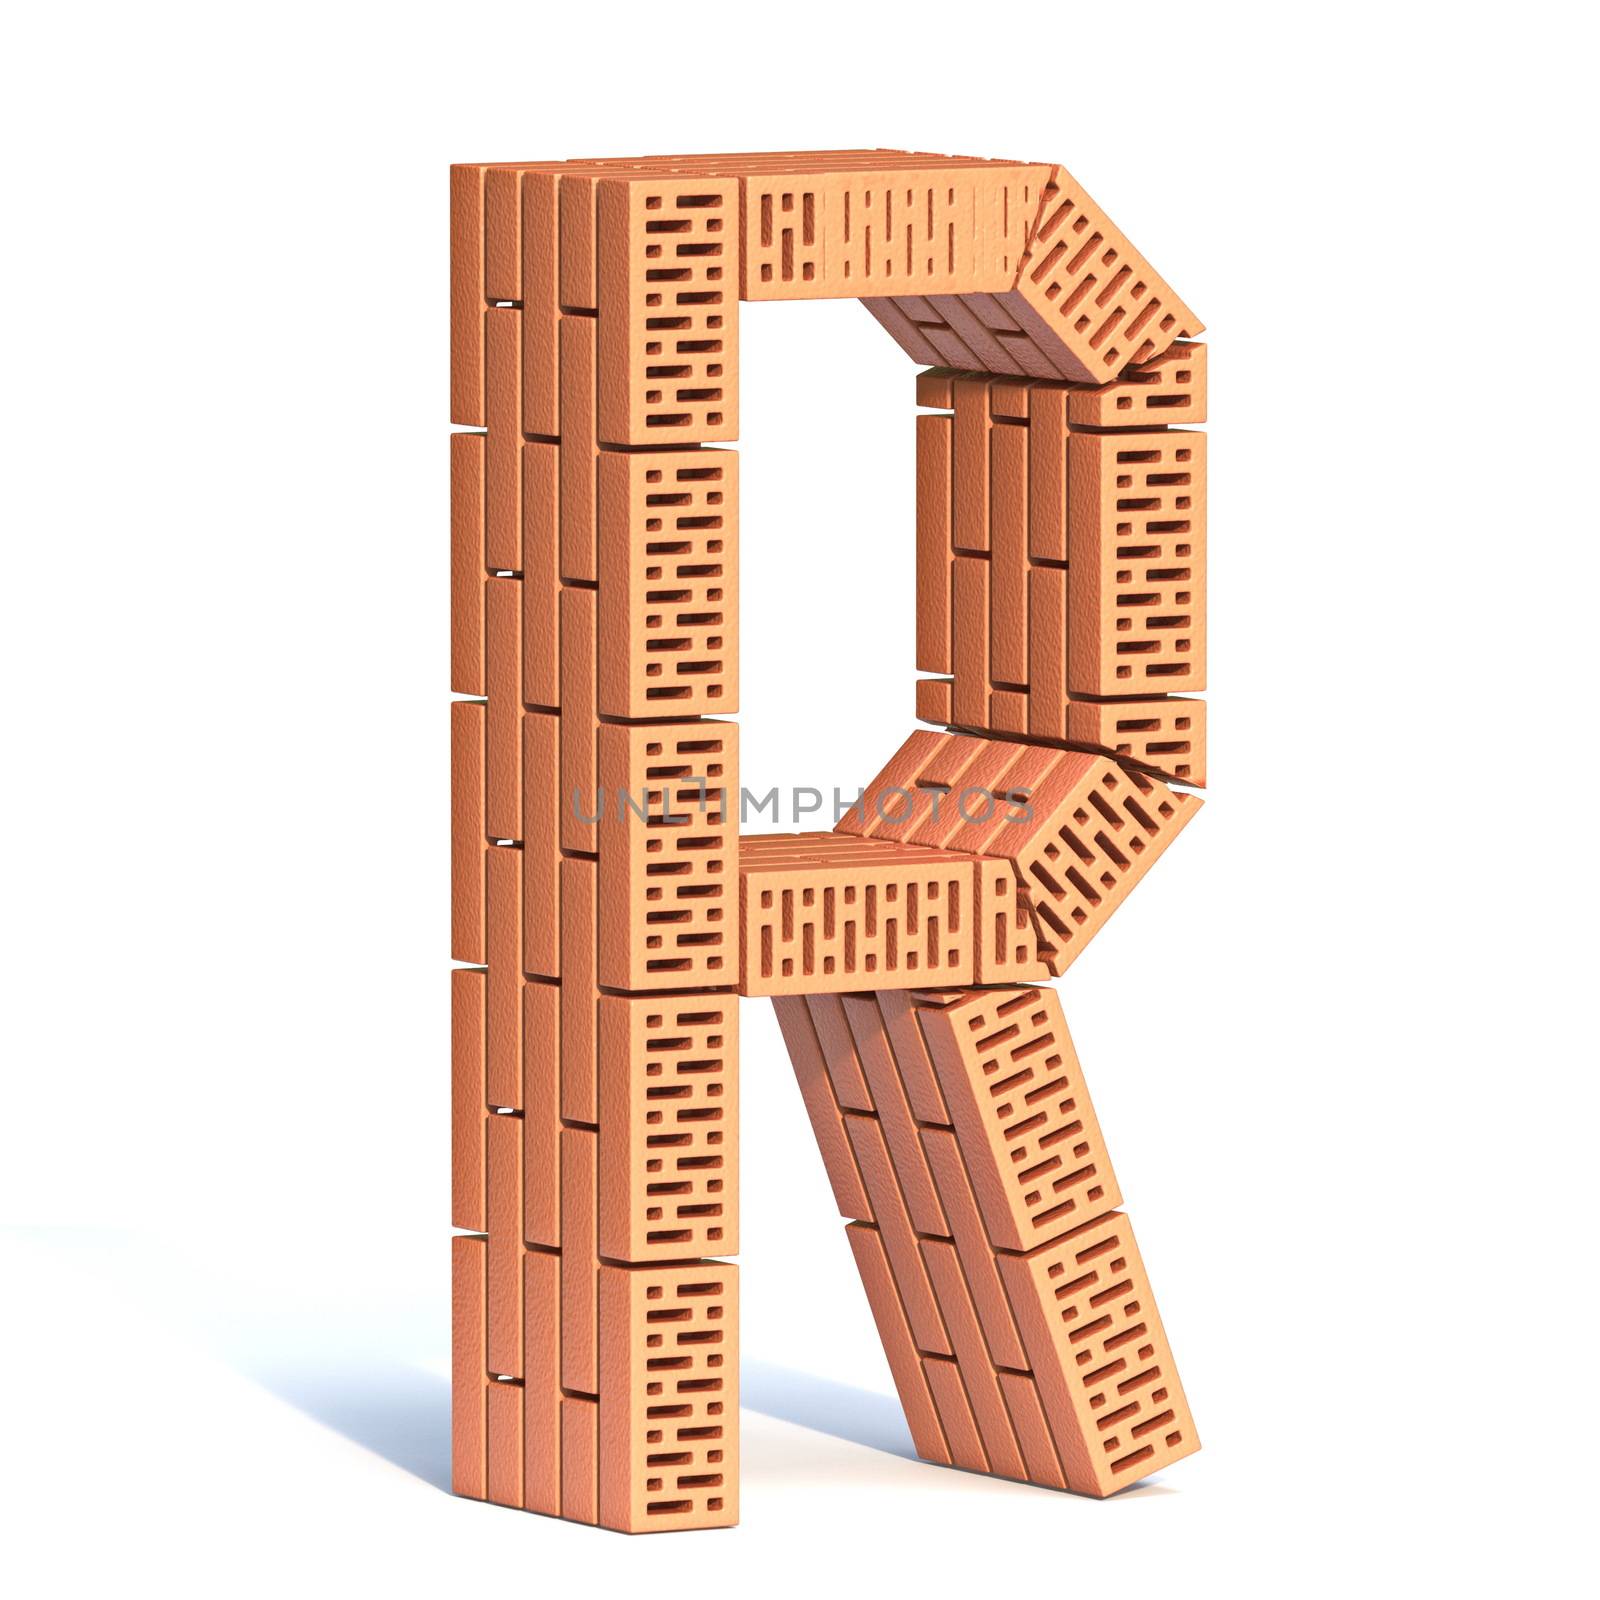 Brick wall font Letter R 3D by djmilic